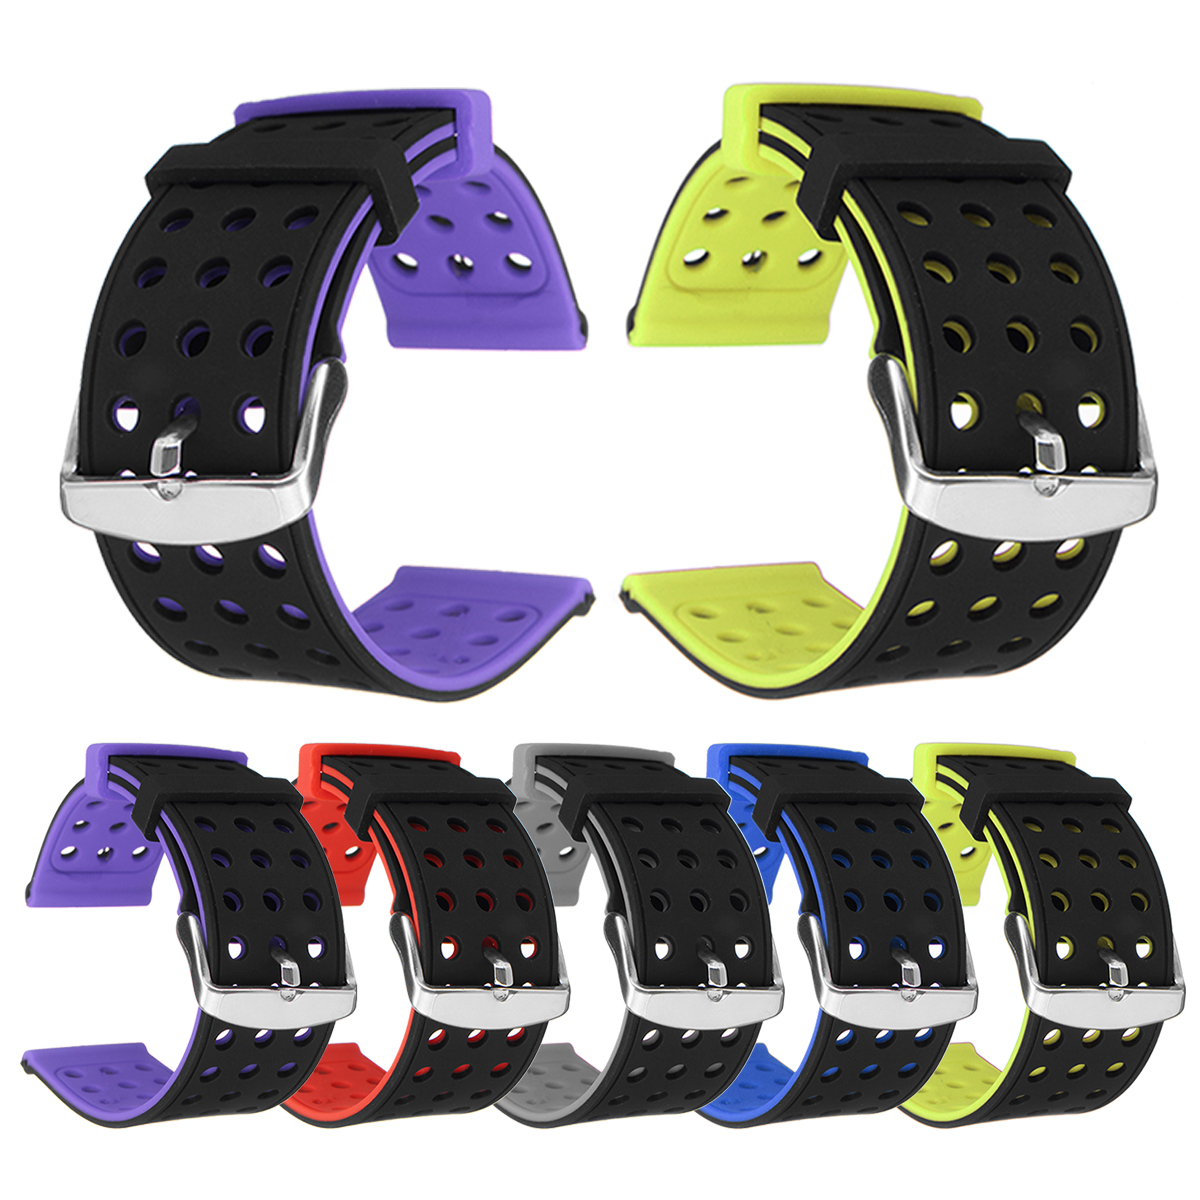 Bakeey Replacement Silicone Rubber Classic Smart Watch Band Strap For Fitbit Versa 2